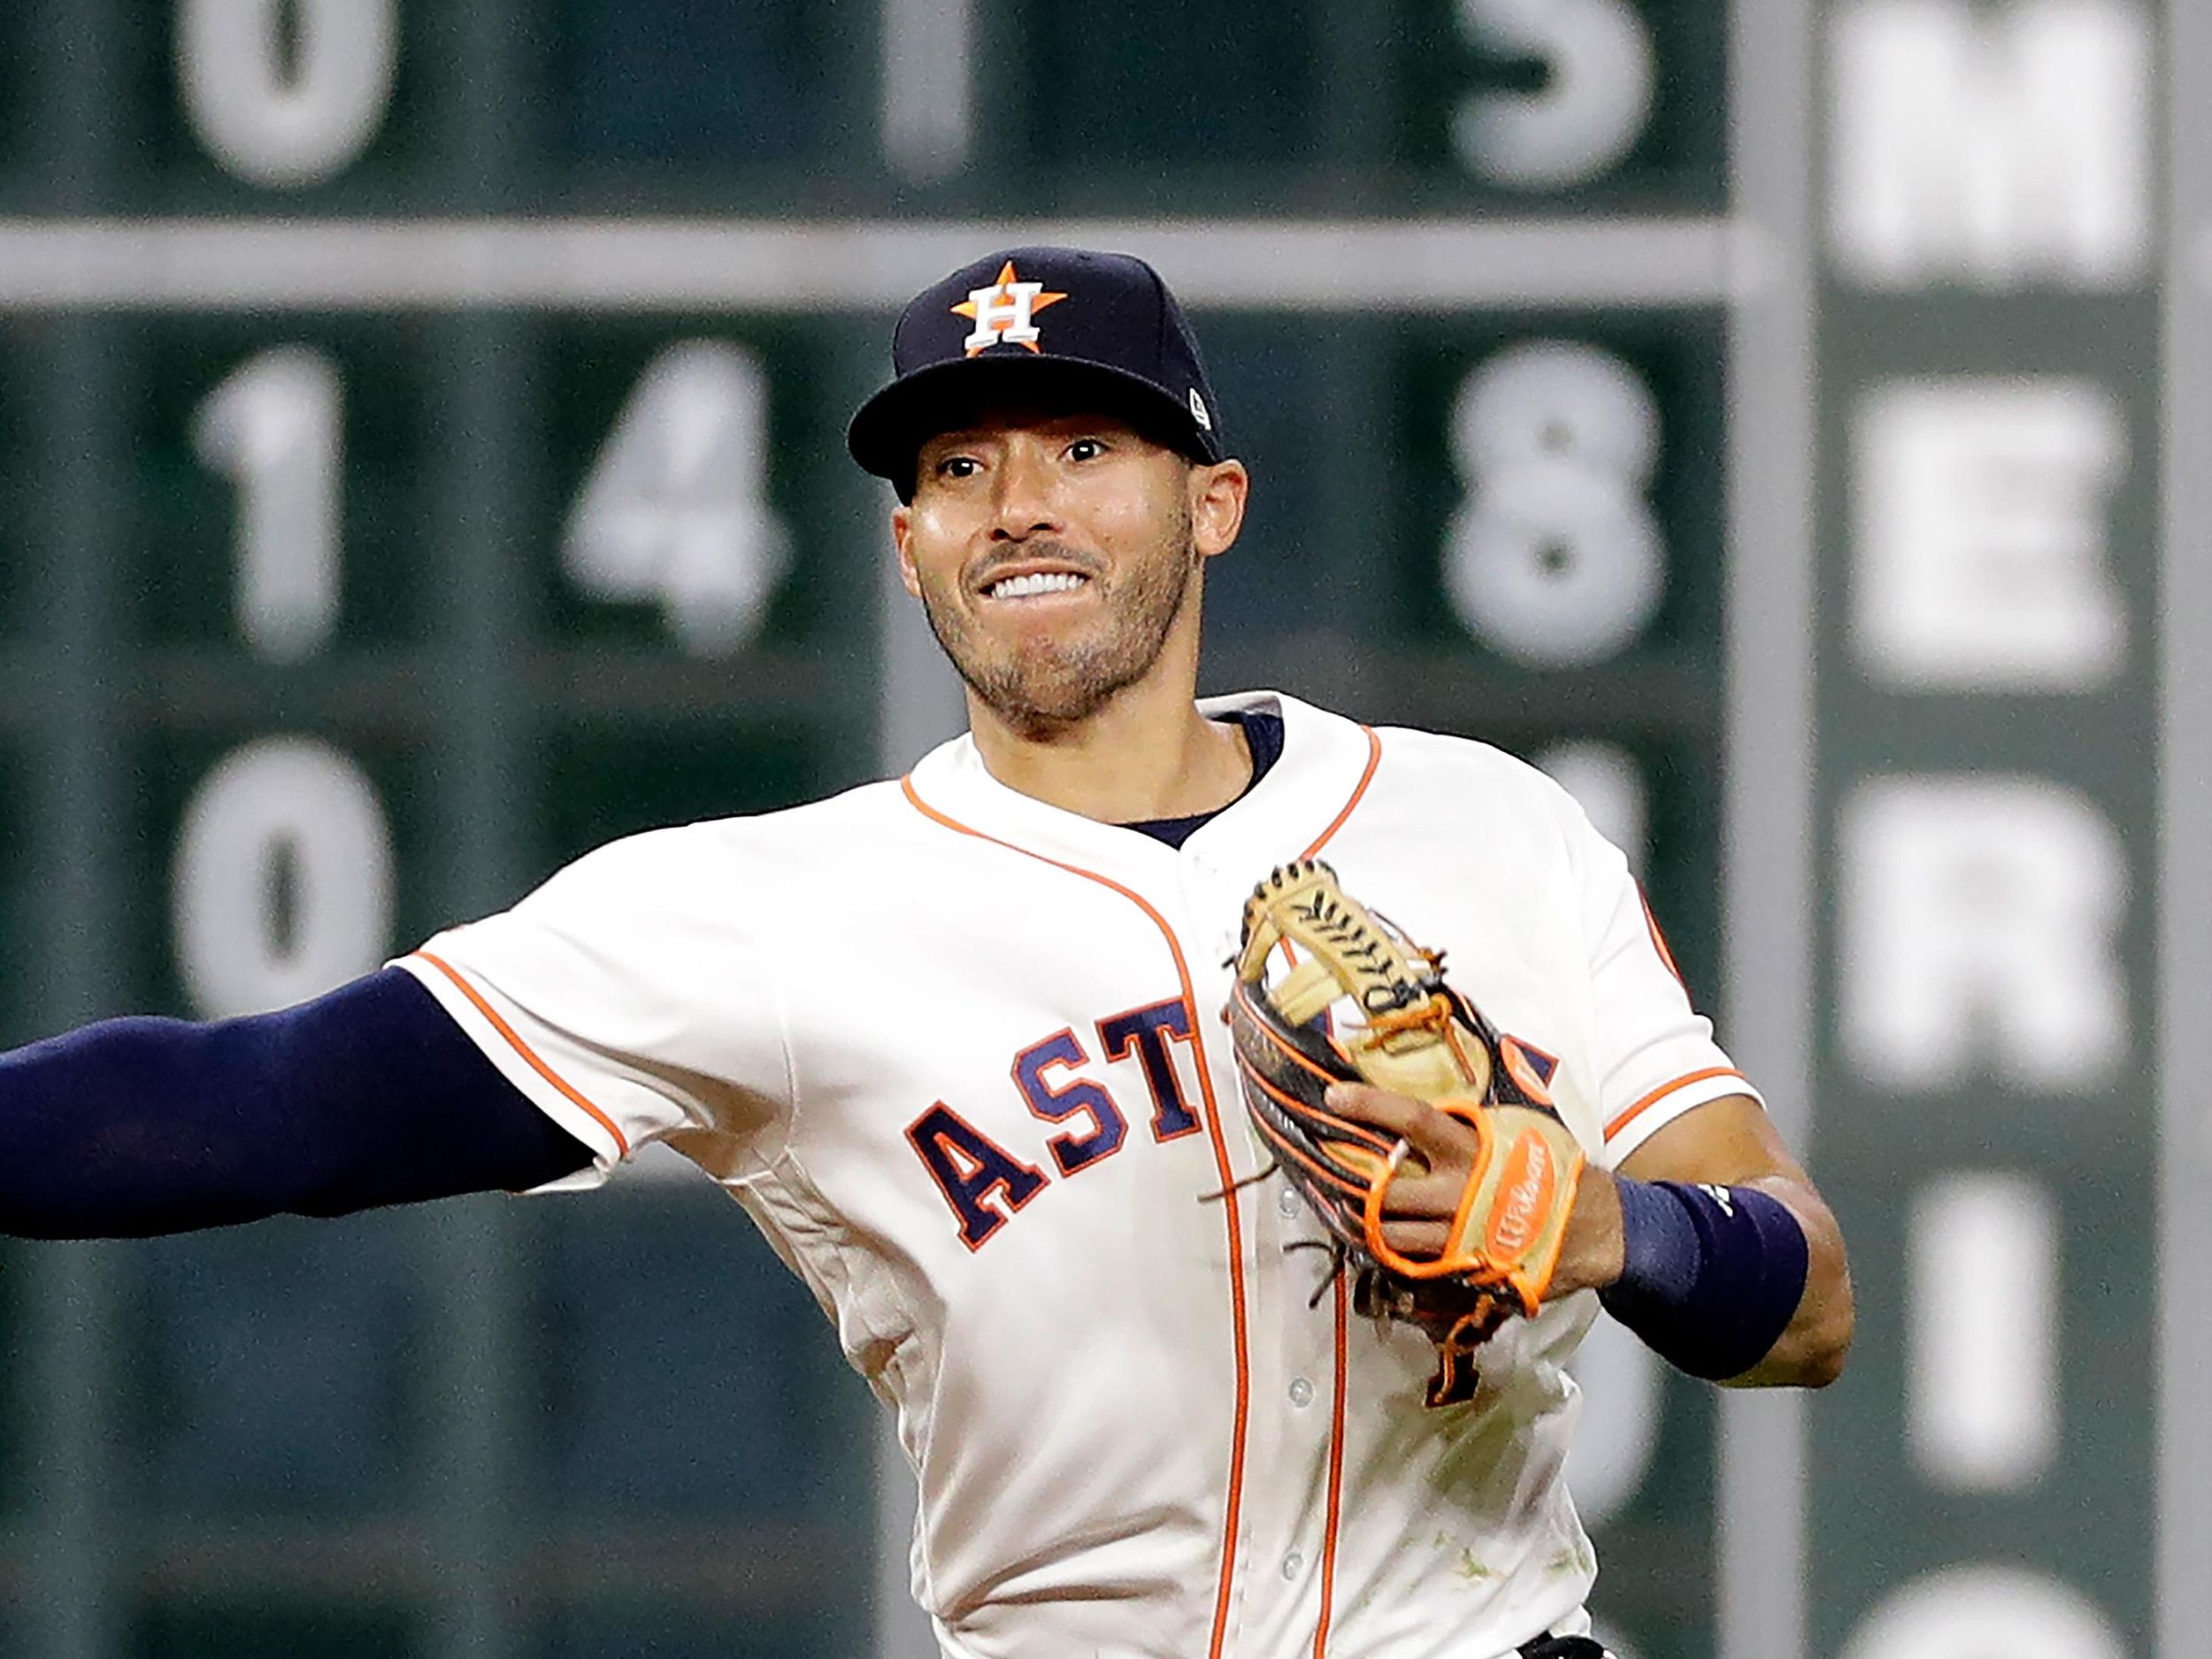 Carlos Correa Now Claims Jose Altuve Didn't Want His Jersey Ripped